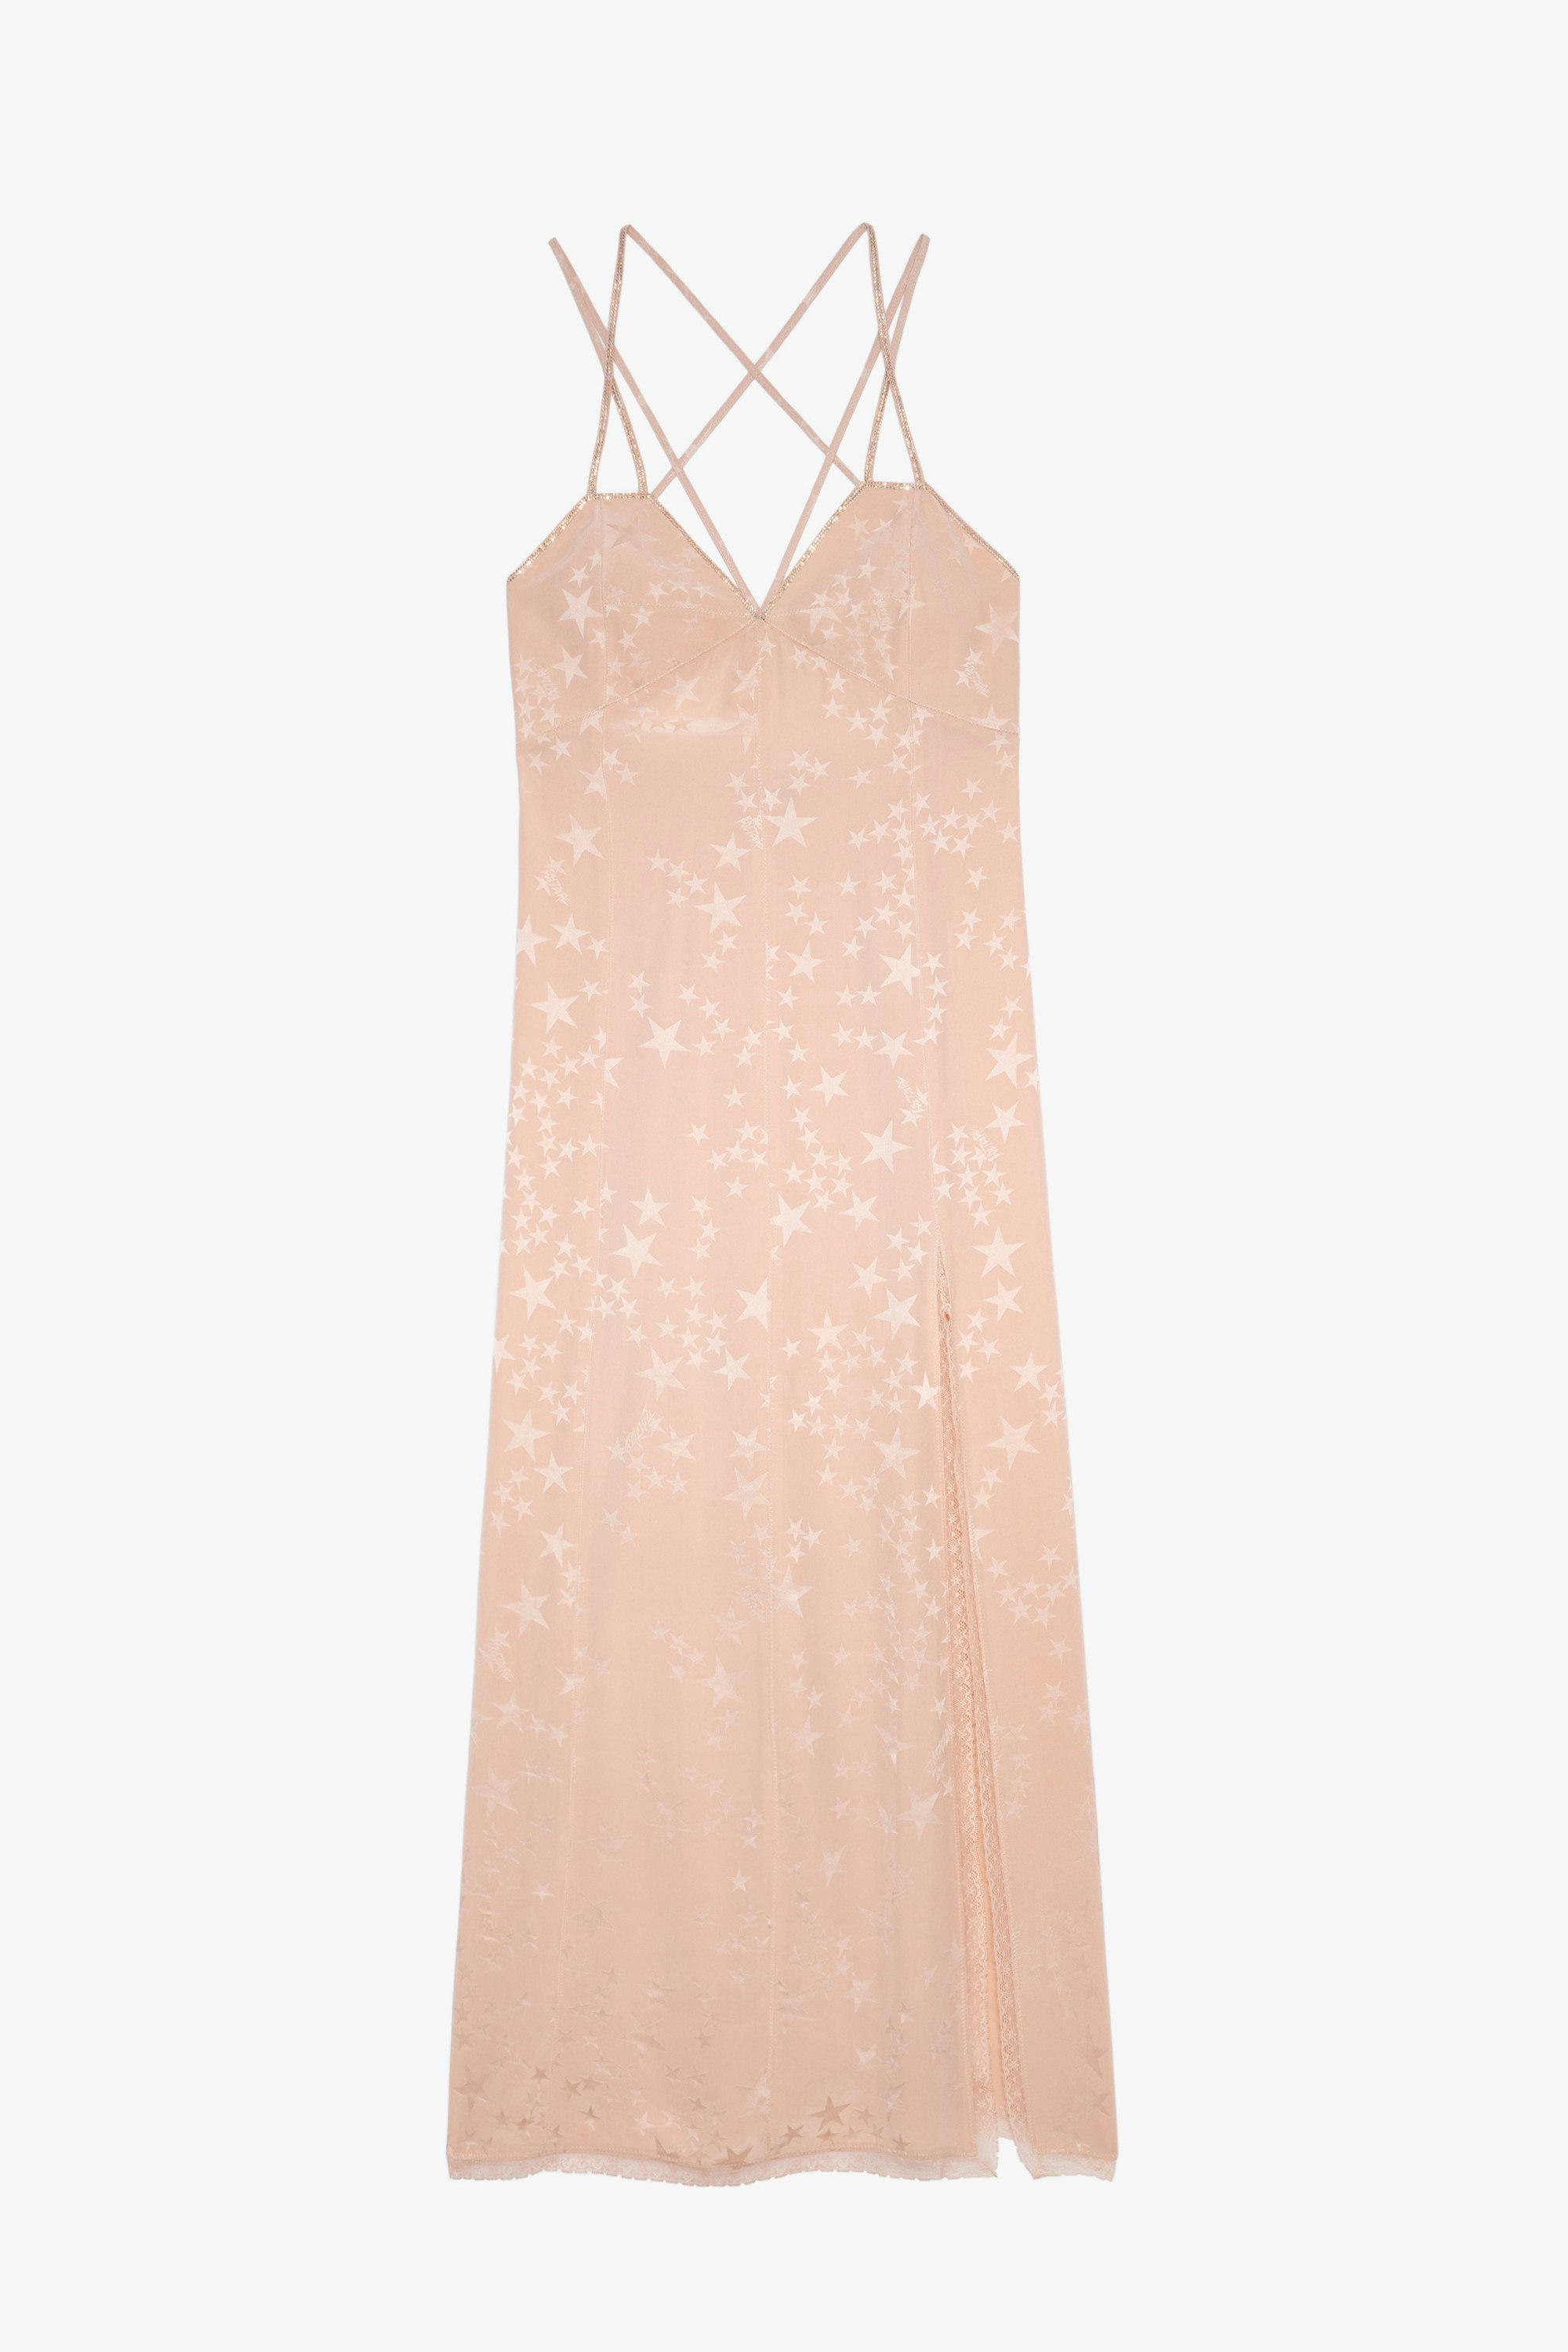 Rohal Silk Jacquard Dress - Women’s long pink star jacquard silk dress with cross straps embellished with diamanté and lace hem.